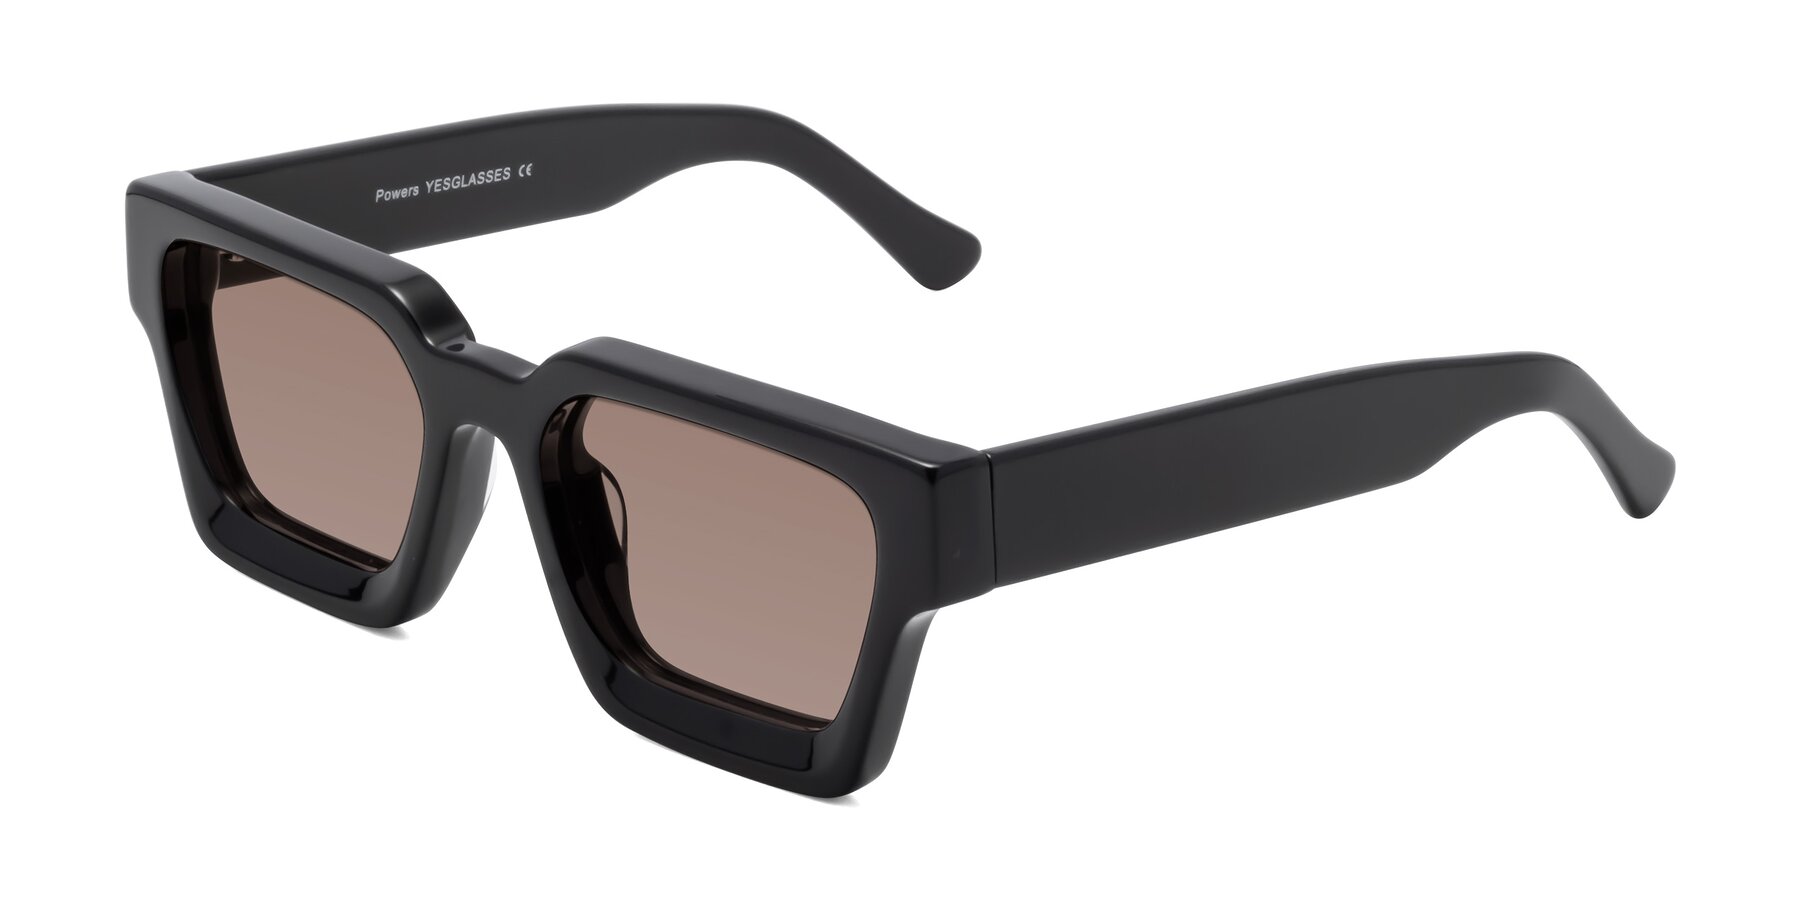 Angle of Powers in Black with Medium Brown Tinted Lenses